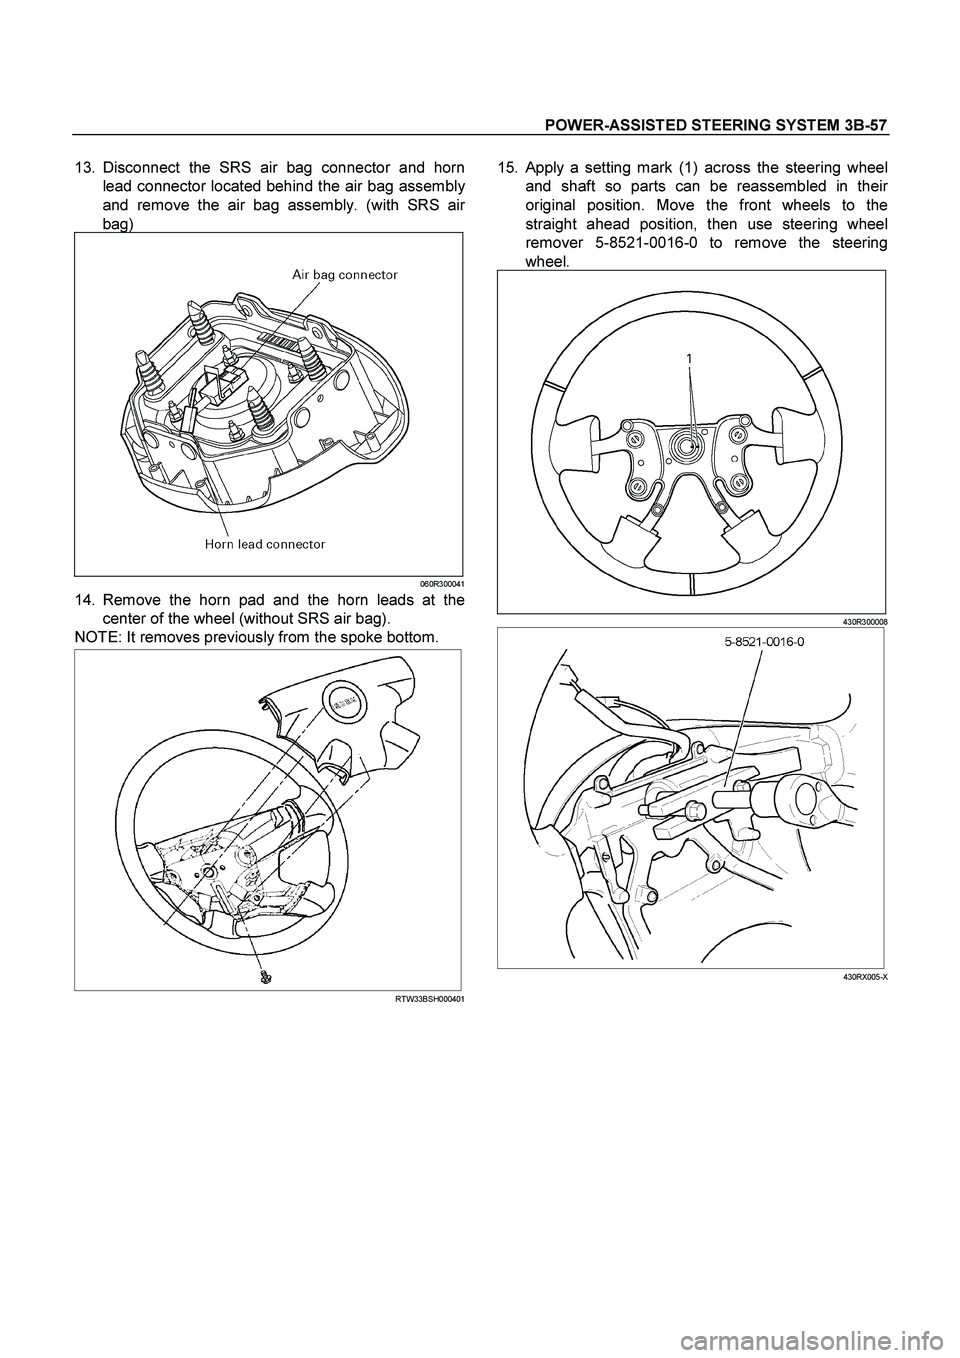 ISUZU TF SERIES 2004 Repair Manual POWER-ASSISTED STEERING SYSTEM 3B-57
 
13. Disconnect the SRS air bag connector and horn
lead connector located behind the air bag assembl
y
and remove the air bag assembly. (with SRS air
bag) 
060R30